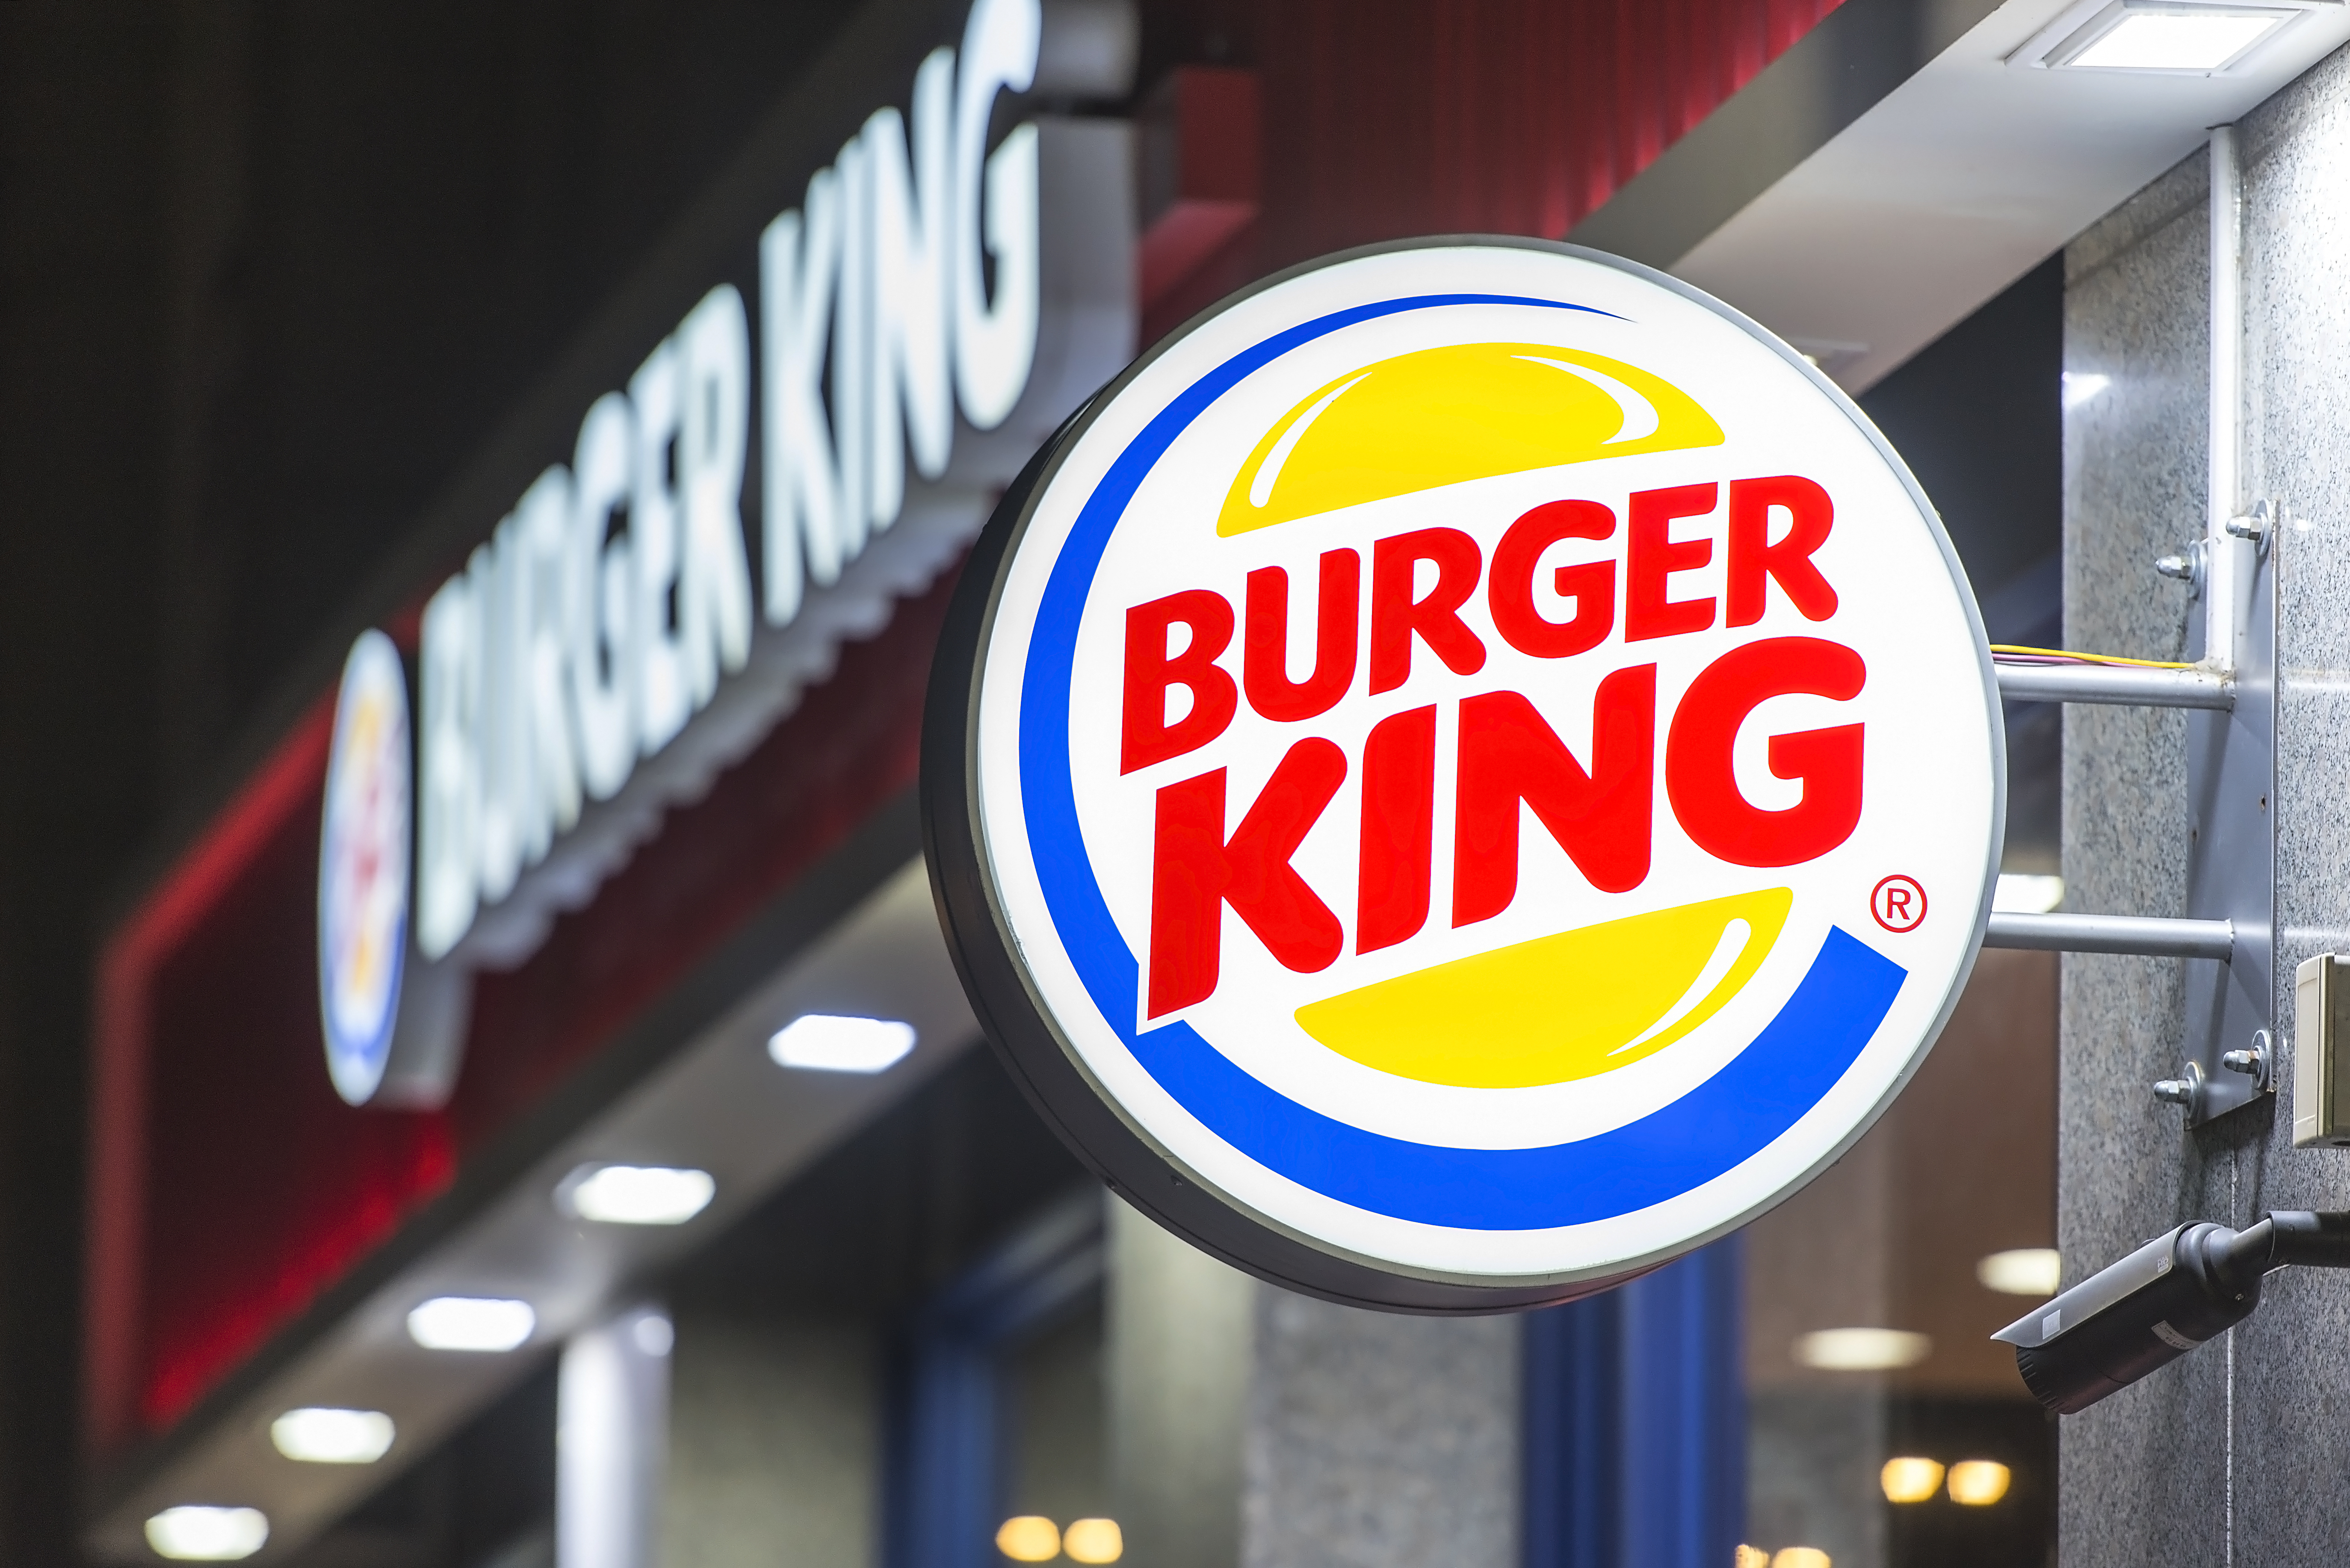 Pictured is a Burger King restaurant. SHUTTERSTOCK/ Savvapanf Photo